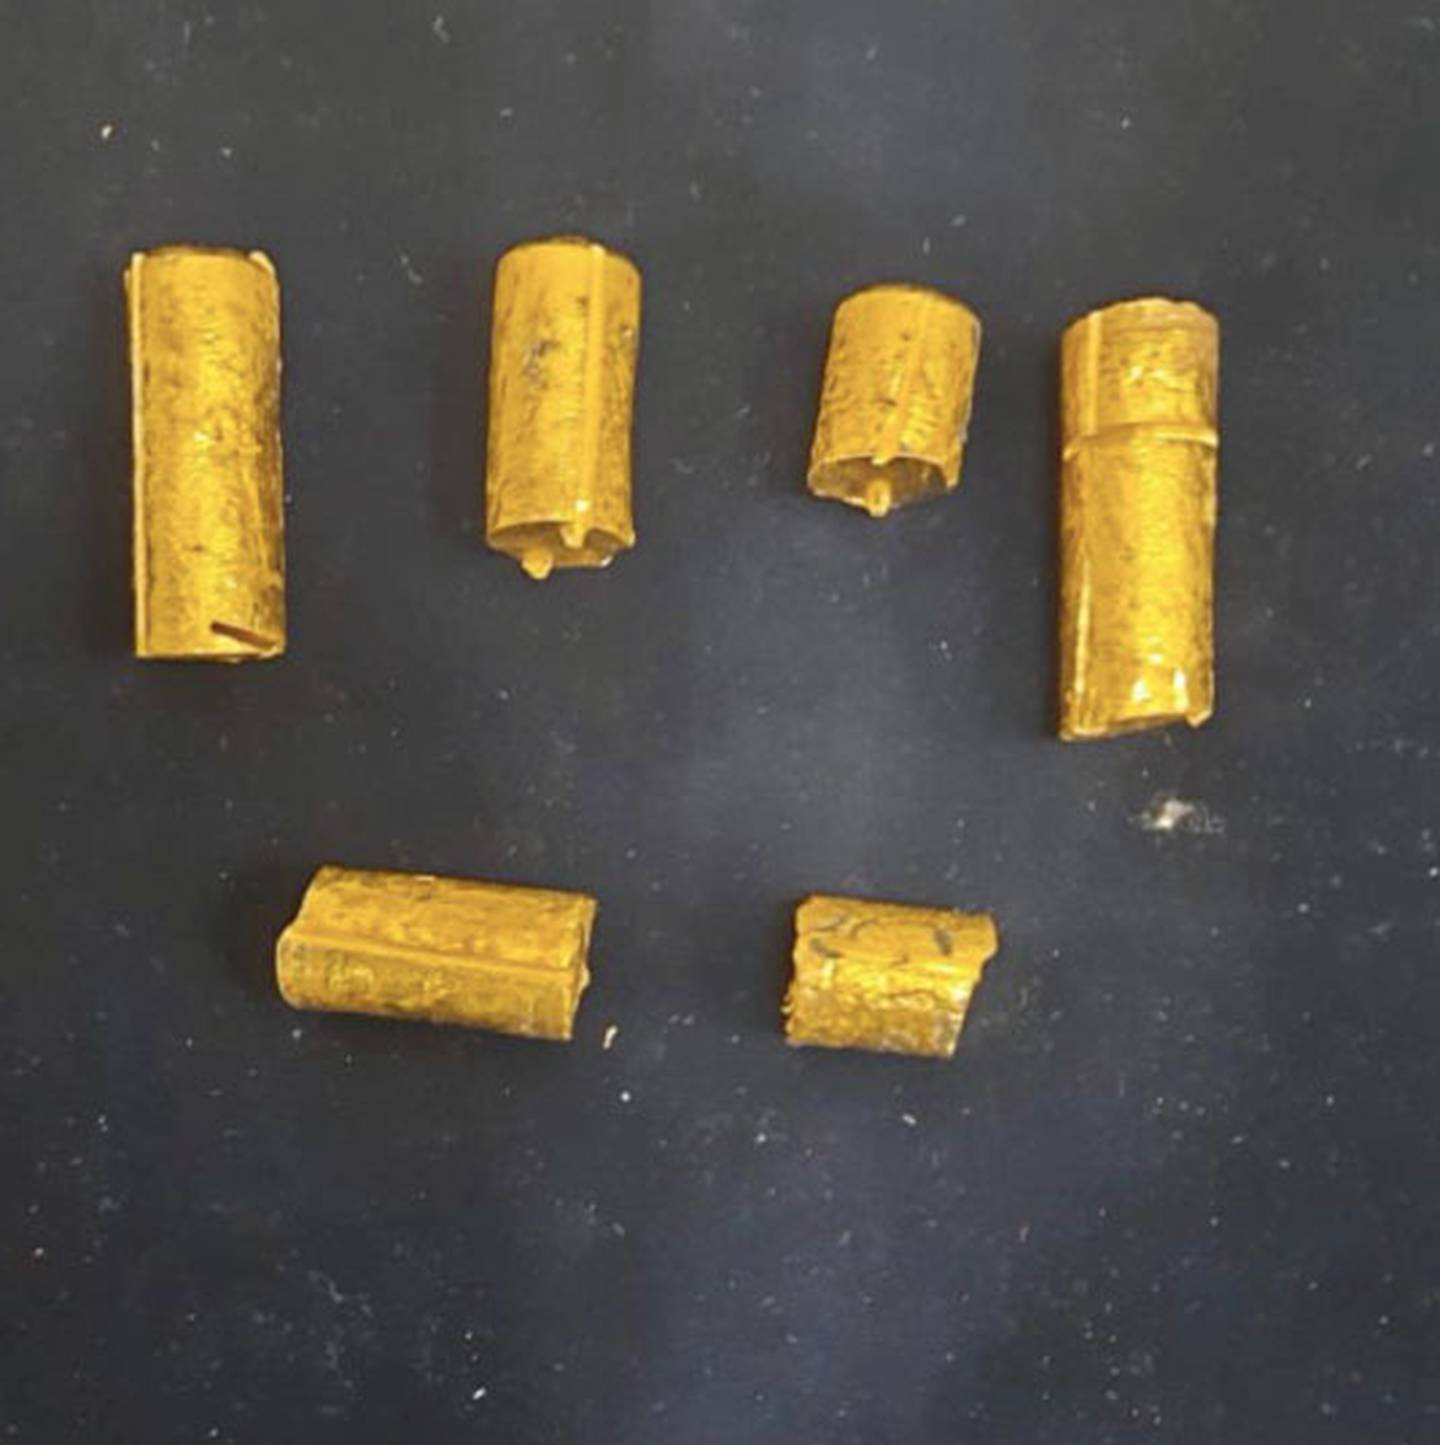 6.7 kgs of gold were concealed inside the handle of a metal fruit juicer. A passenger carried it in his hand luggage on a flight from Dubai to Hyderabad, India, on November 13, 2021. Photo: Hyderabad customs 